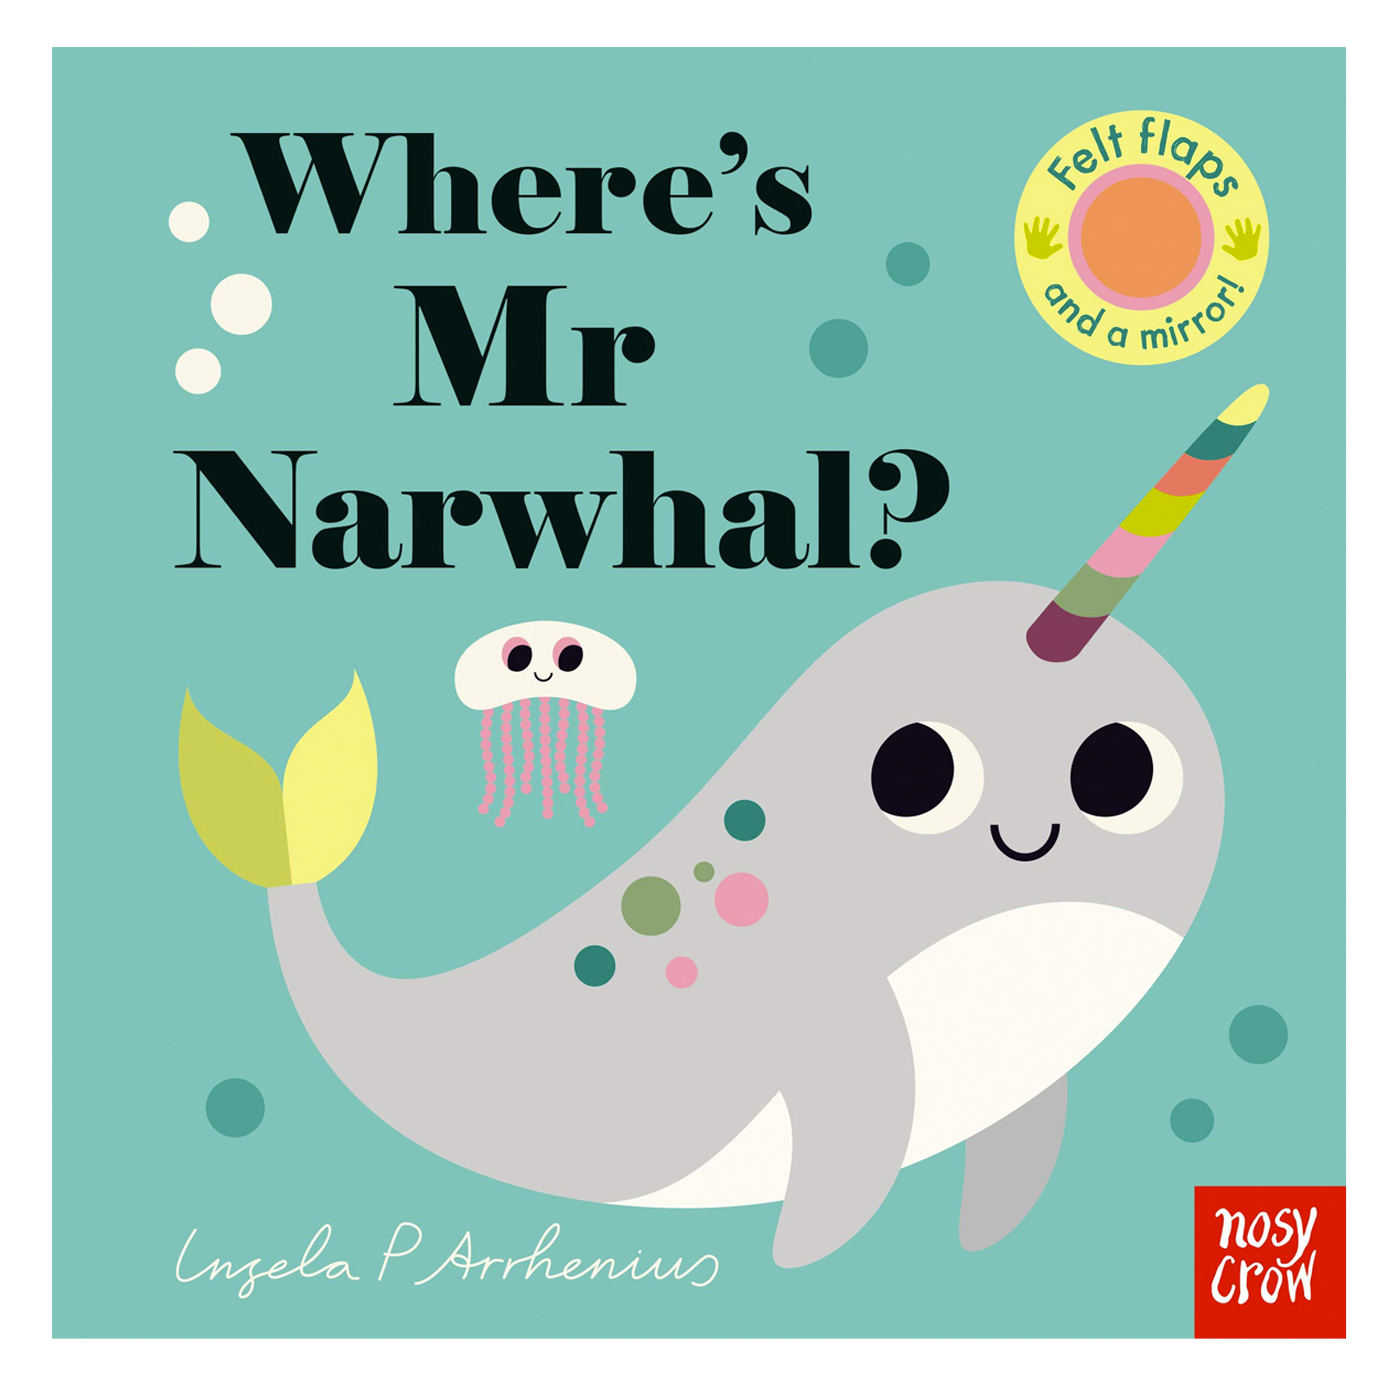  Where's Mr Narwhal?